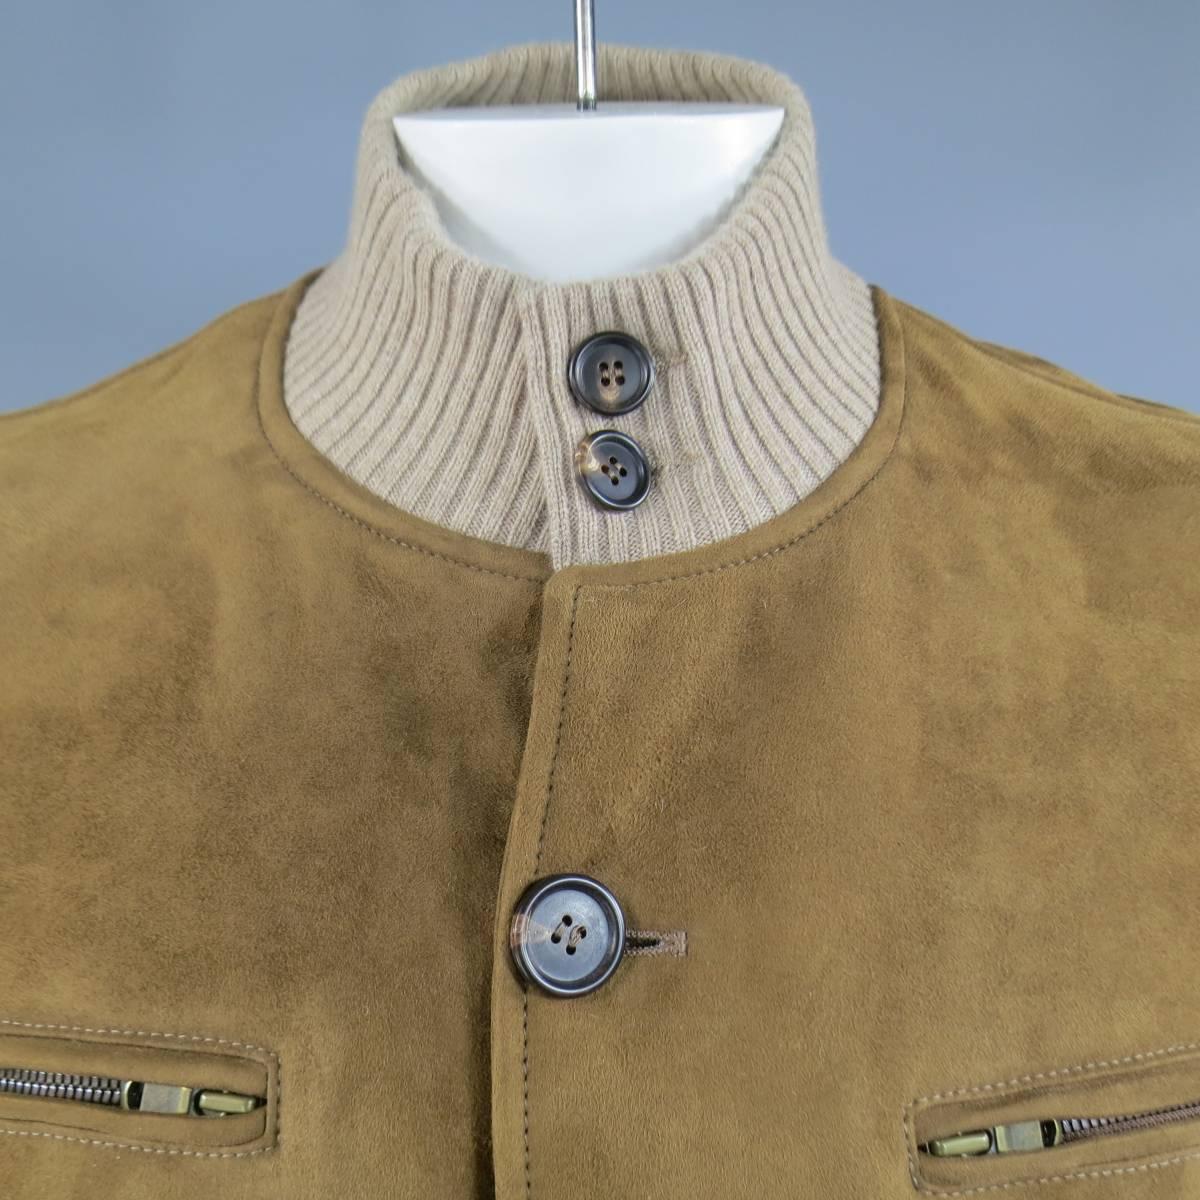 Classic BRUNELLO CUCINELLI bomber jacket in tan sudede shearling featinga button up front, high, ribbed collar, zip  pockets, and beige ribbed bands. Made in Italy.
Retails at $5800.00 .

New with Tags.
Marked Size: XL
 
Measurements:
